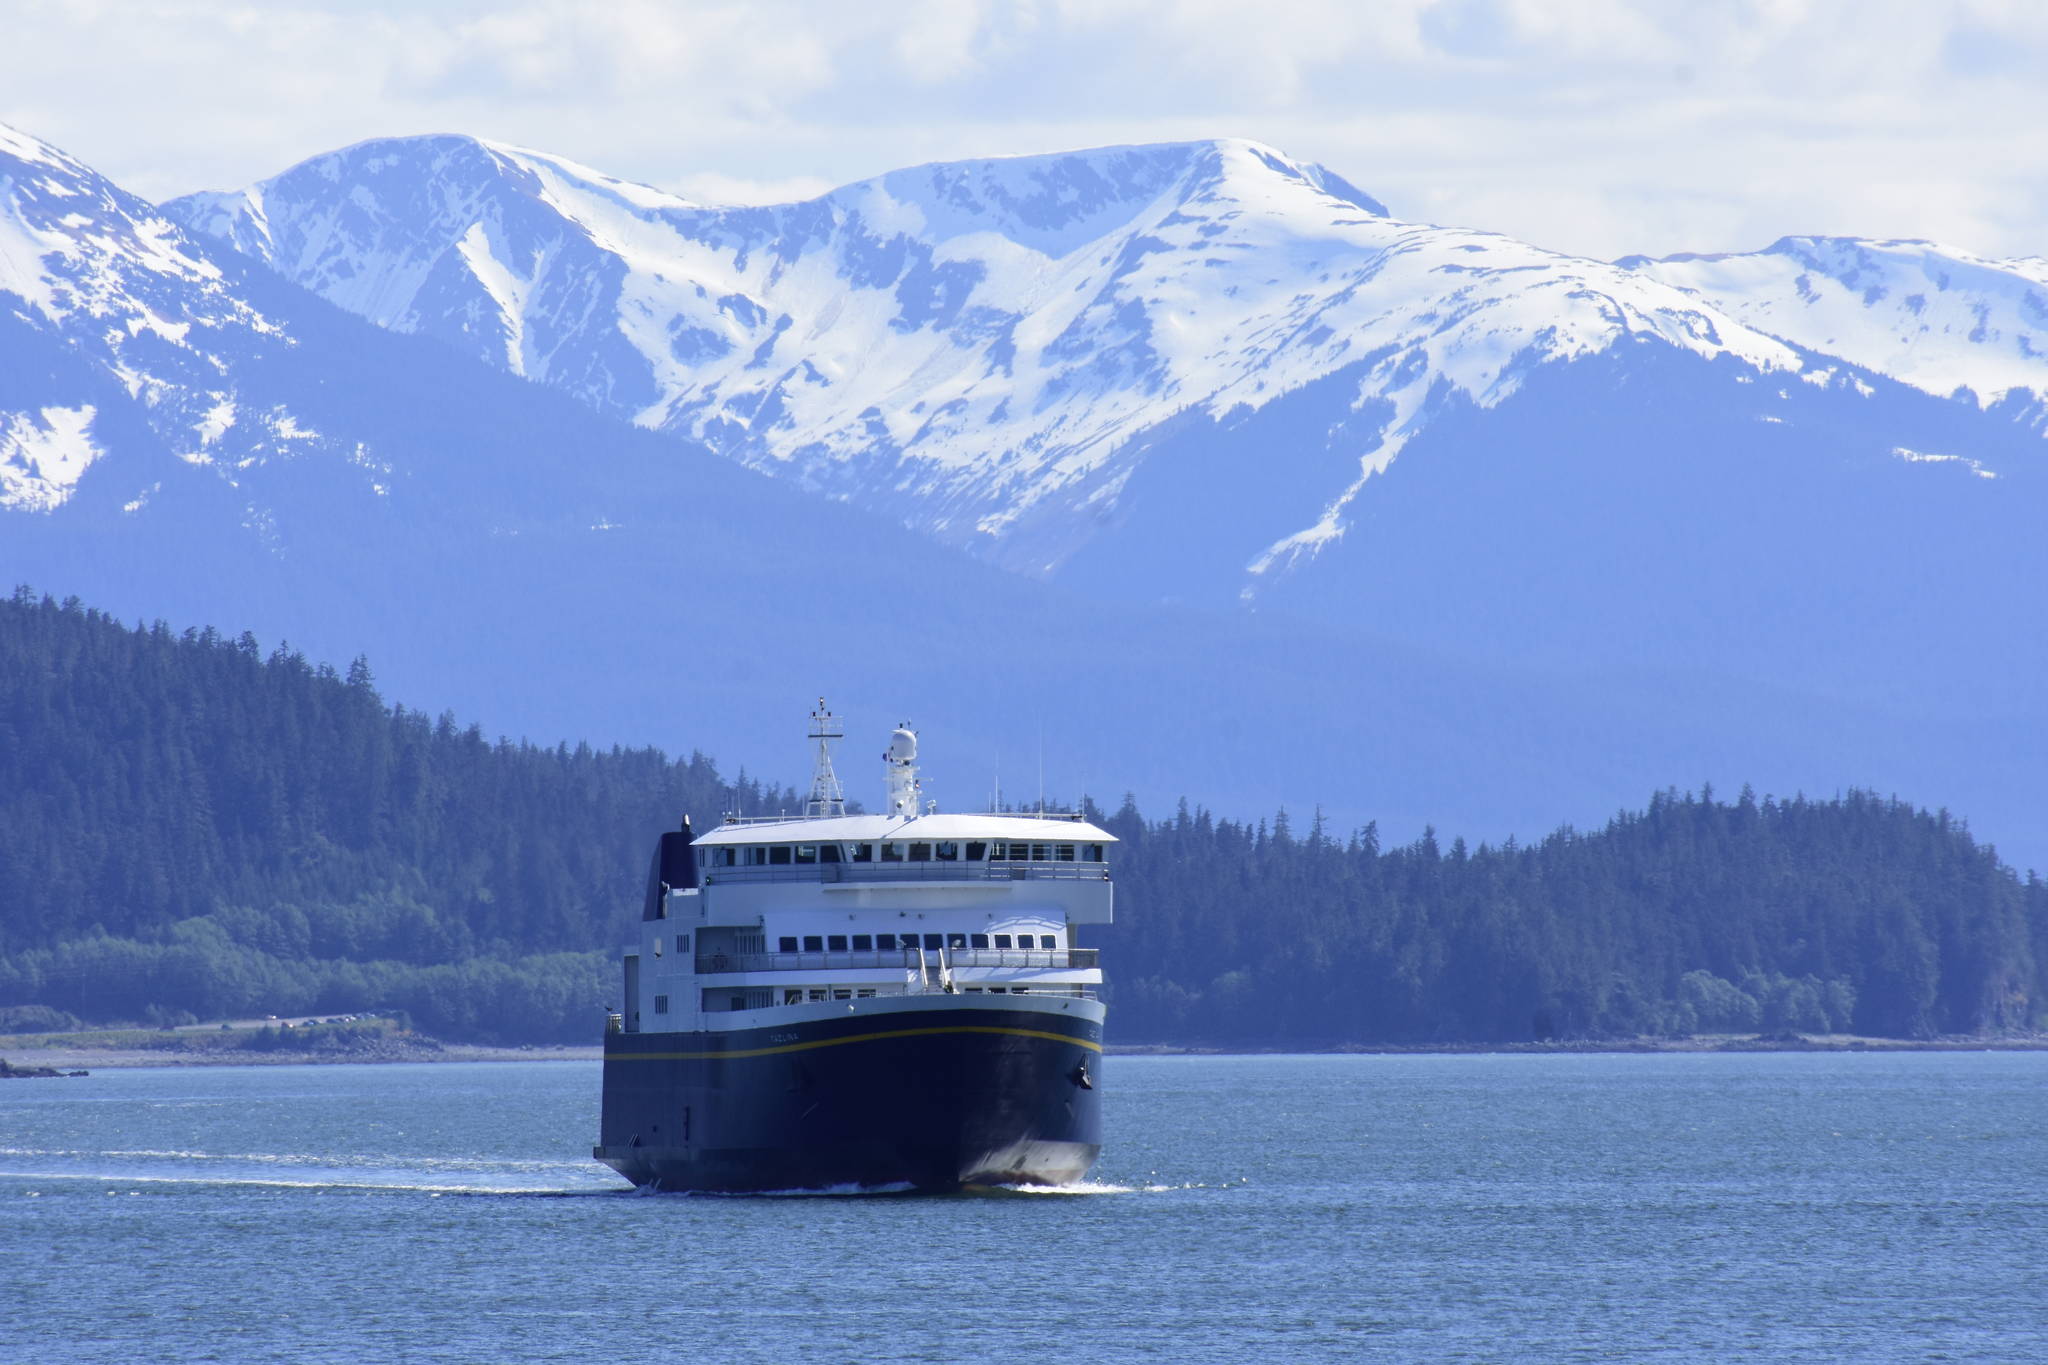 Peter Segall / Juneau Empire file
Service from ferries like the Tazlina, seen here coming into dock at Juneau on May 16, 2020, have become unreliable for coastal communities as year-to-year planning leads to high levels of uncertainty, according to coastal lawmakers.